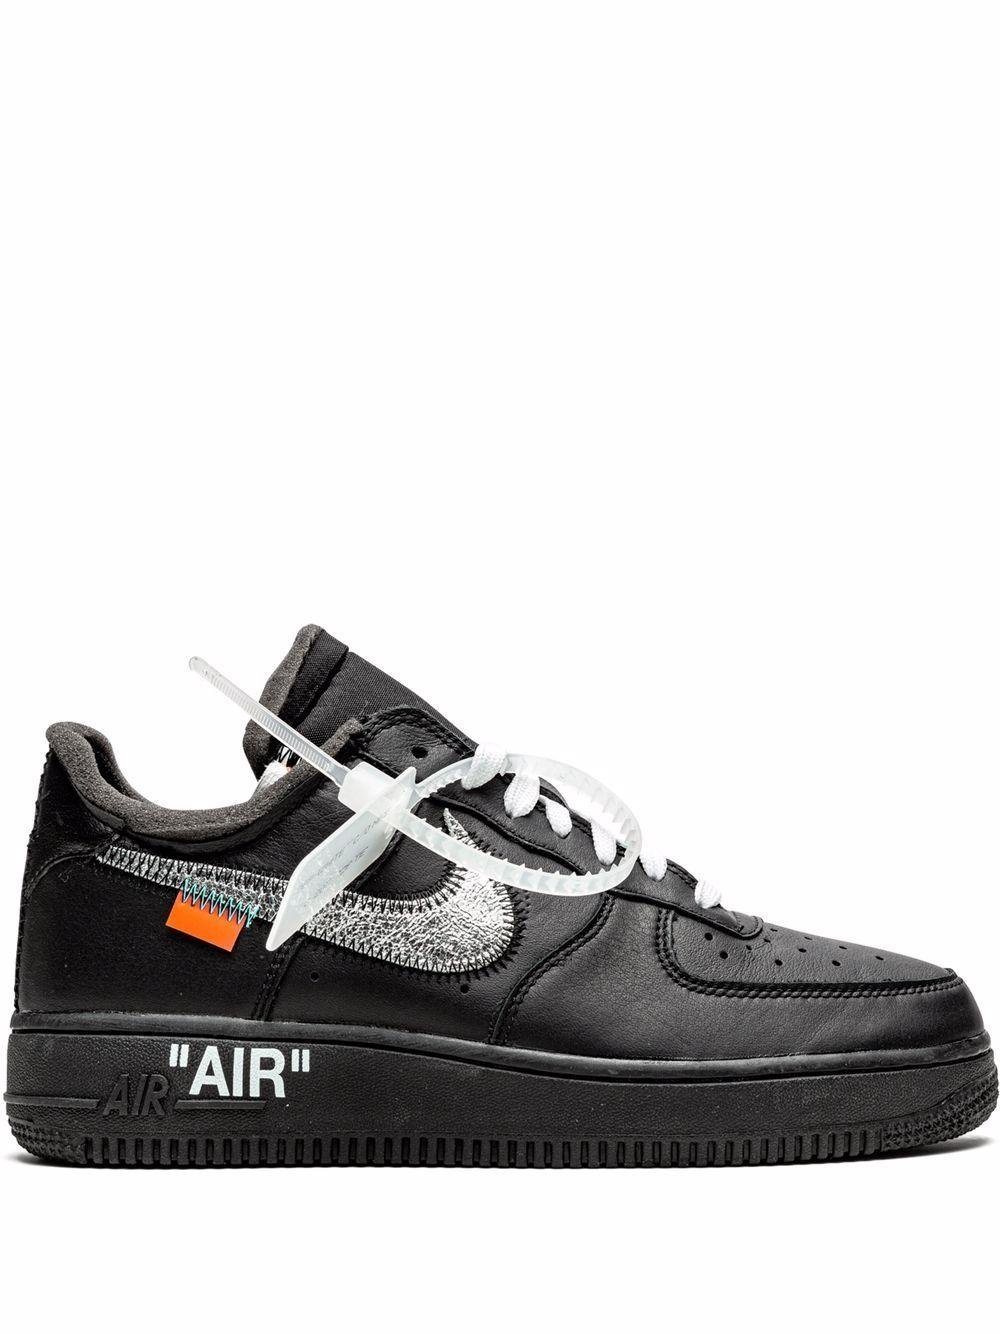 Nike Off-White x Air Force 1 Low '07 'MoMA